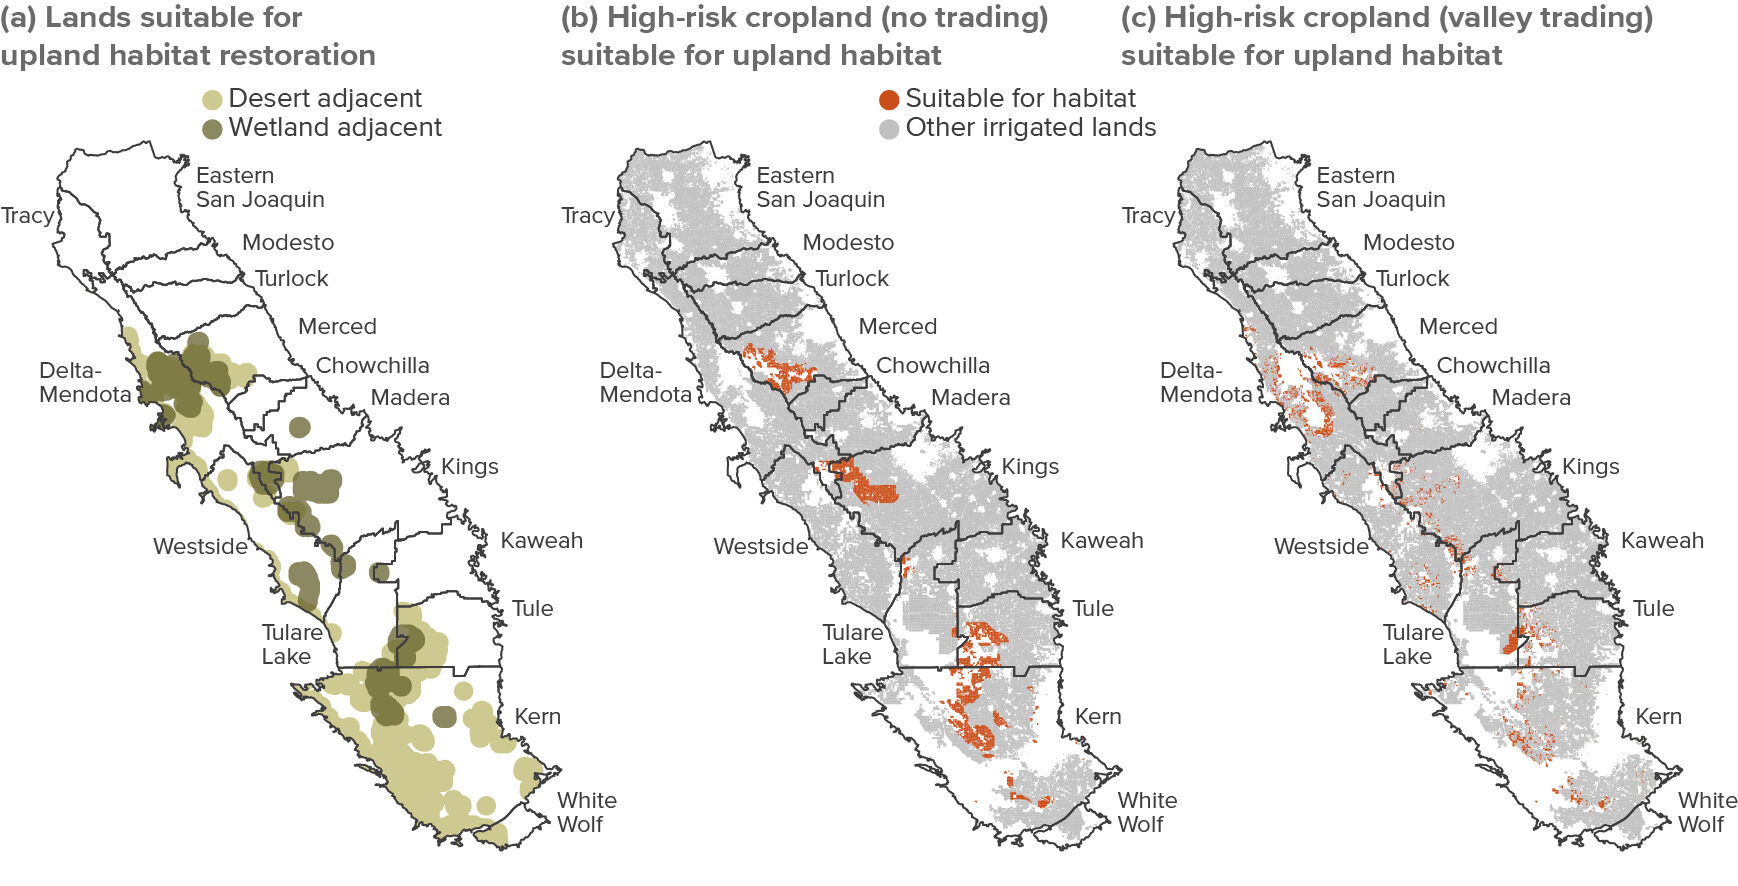 figure - Opportunities for upland habitat restoration may arise on formerly irrigated cropland